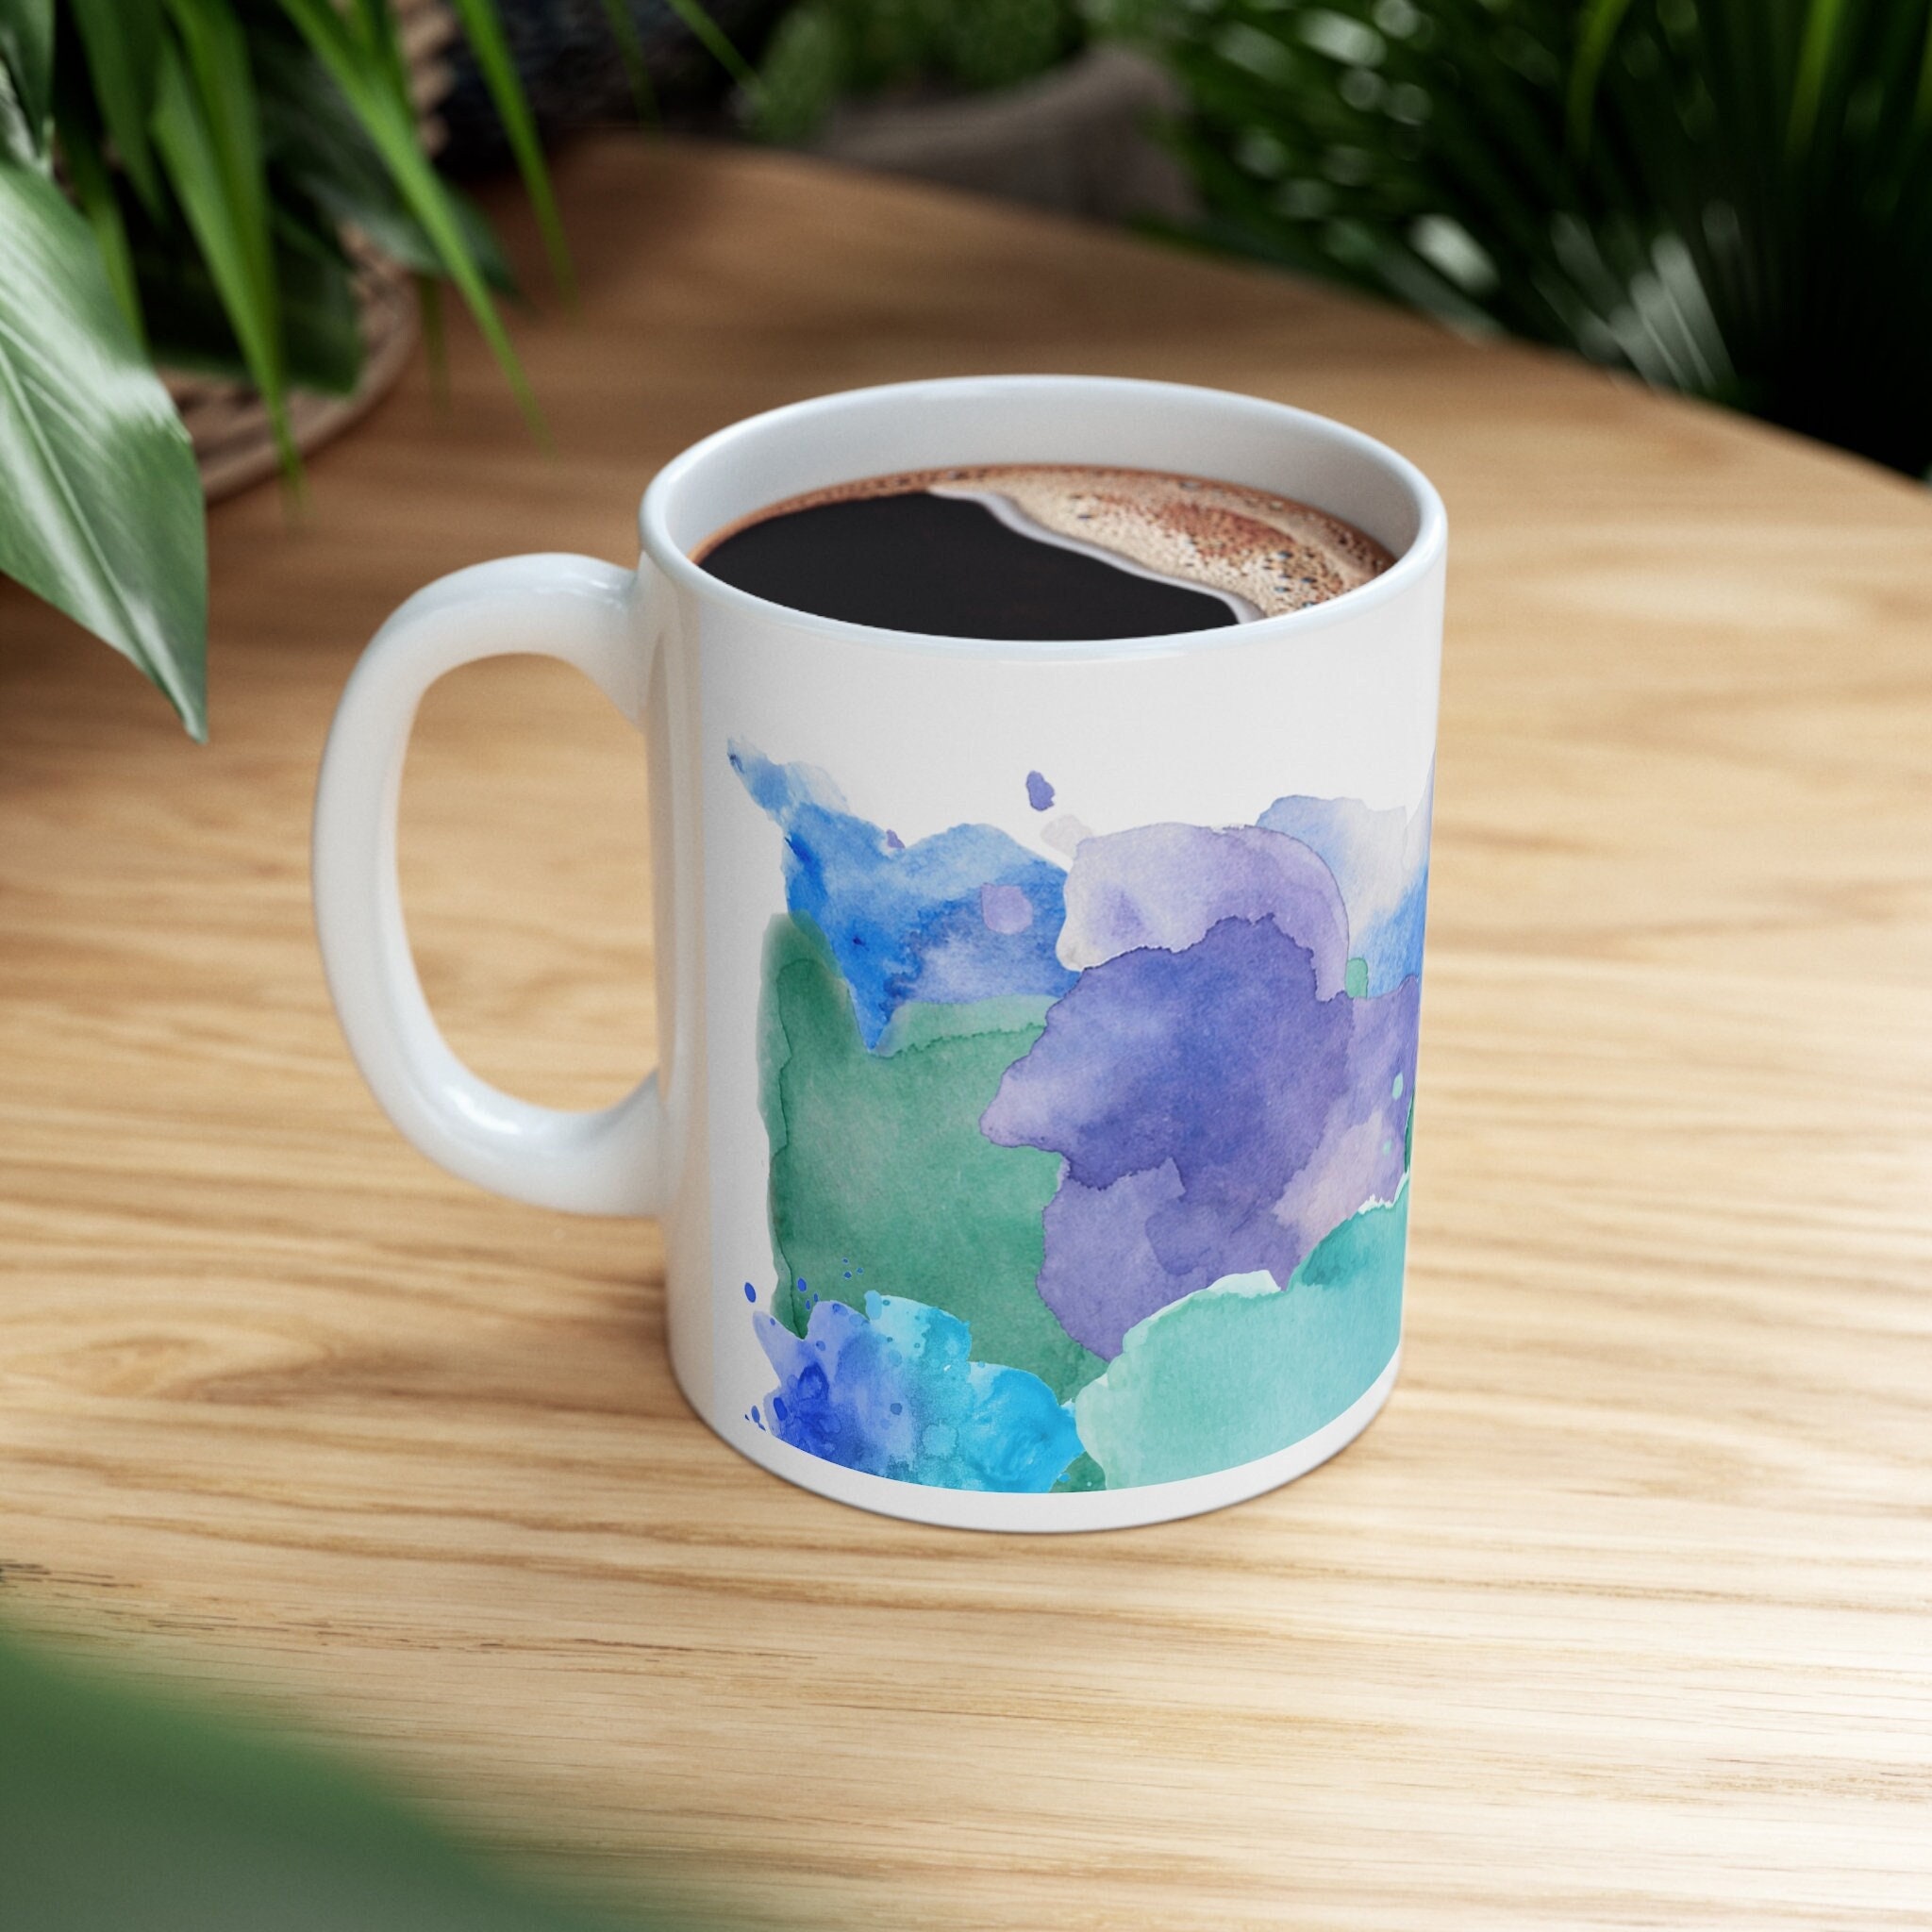 Paint Water Cup Simple Funny Label for Artists and Painters Coffee Mug for  Sale by Stebo18